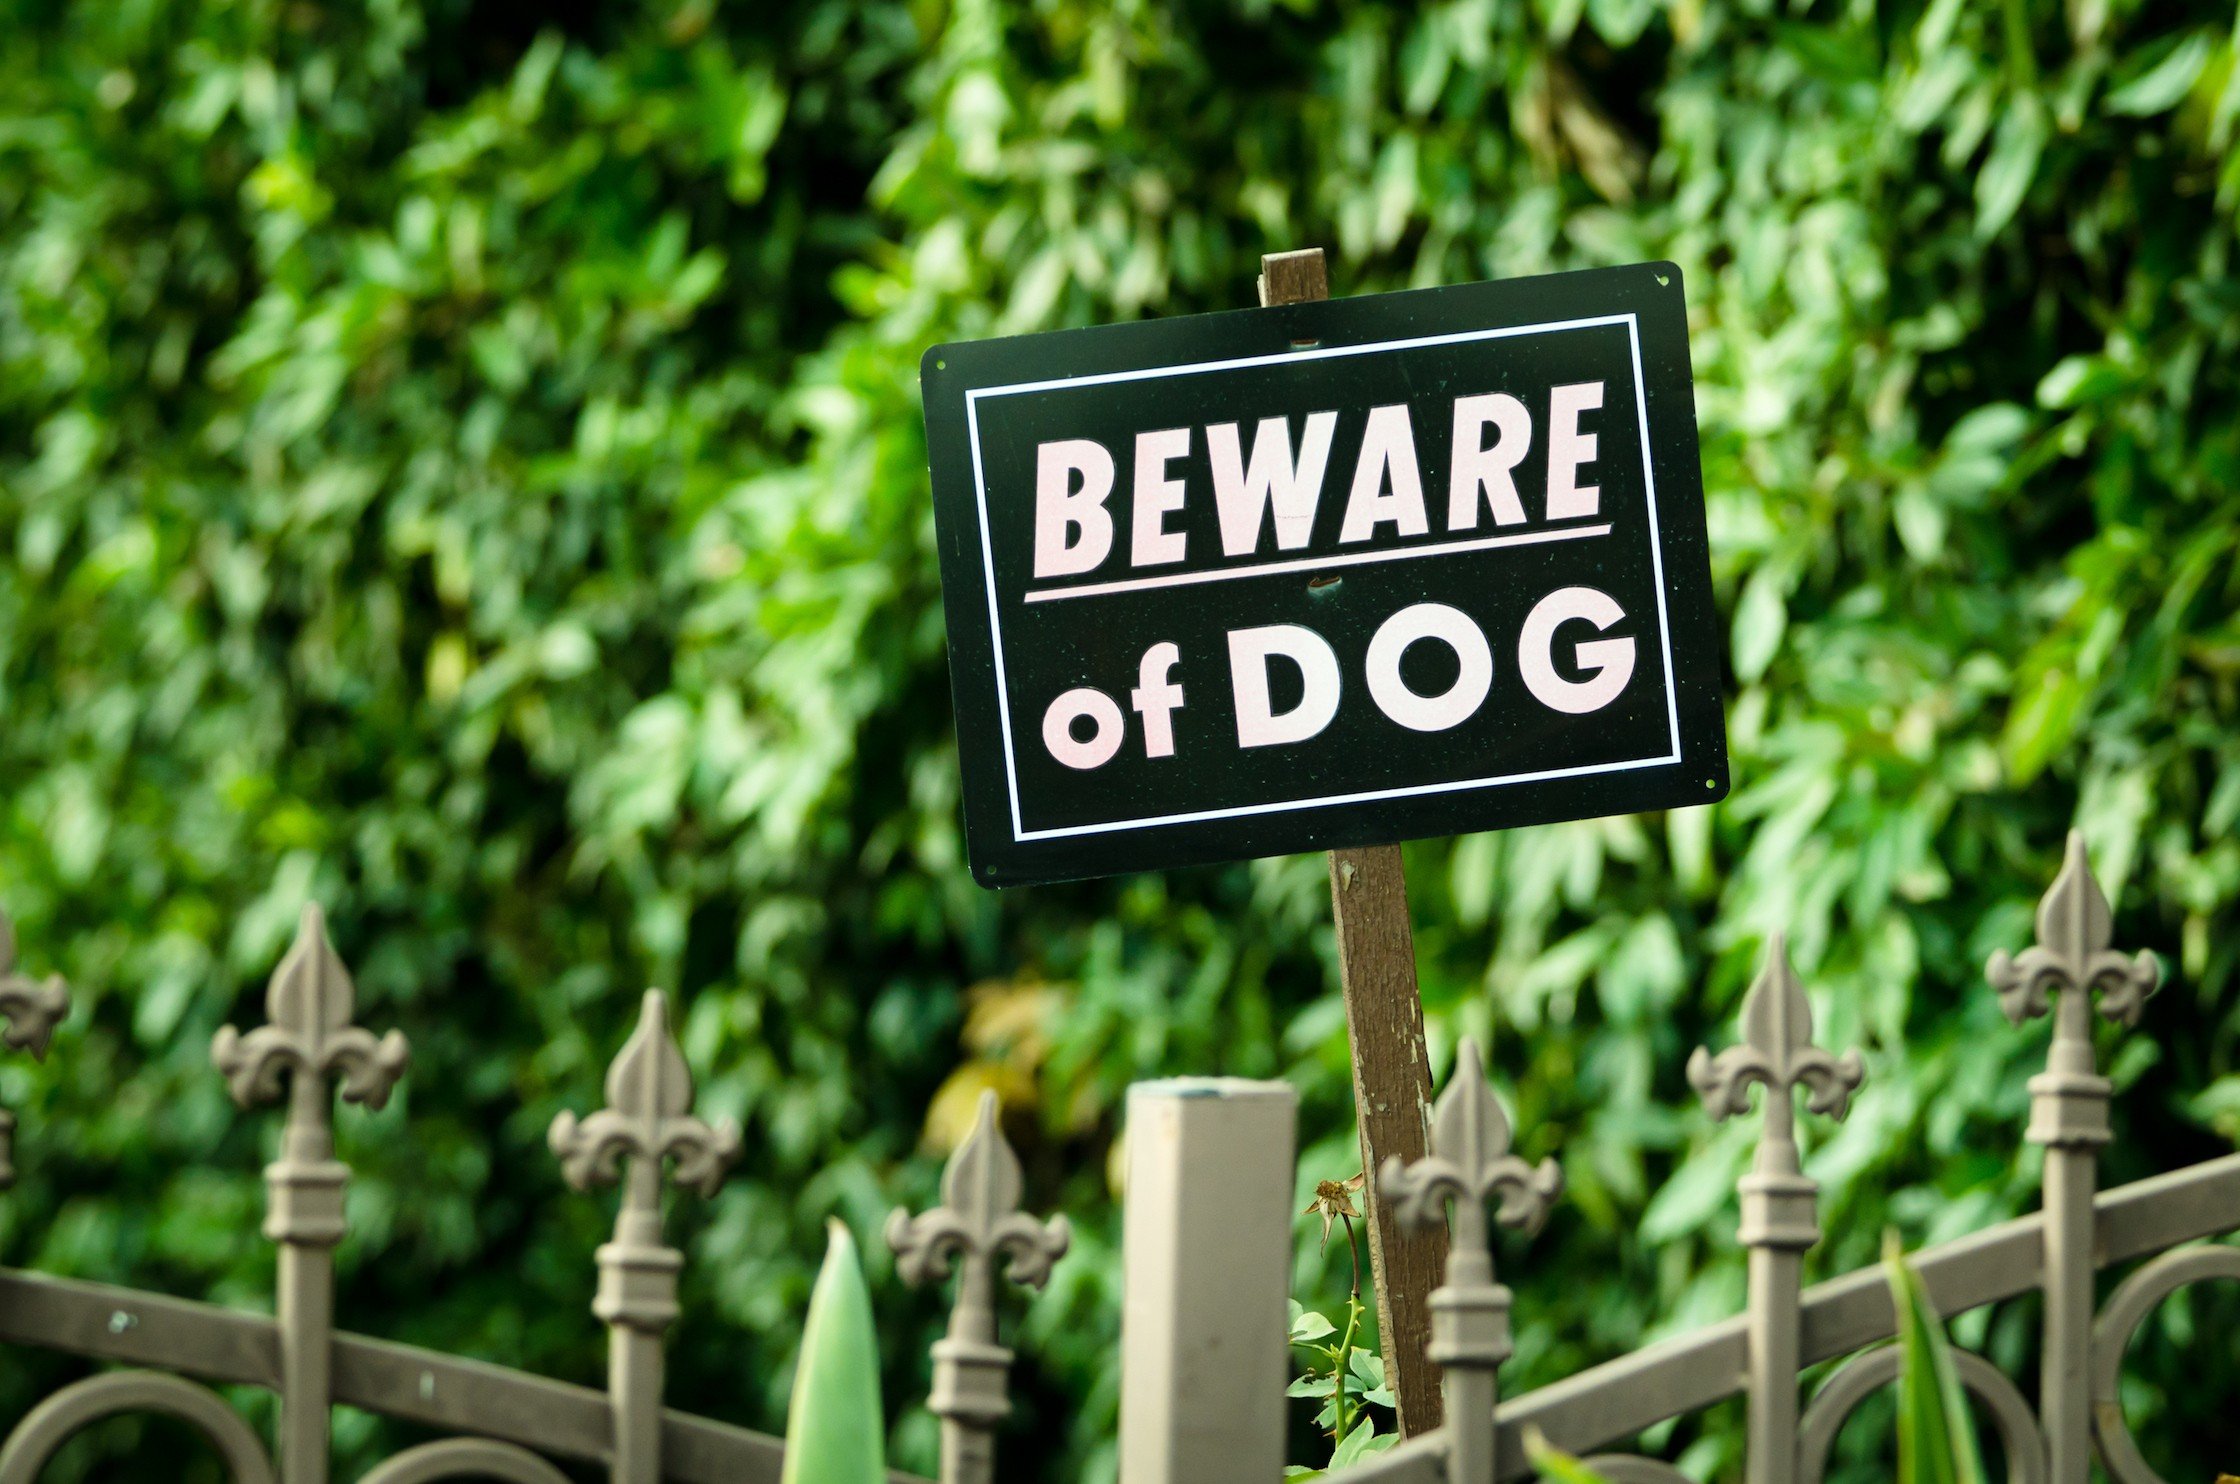 Black beware of dog sign over fence with green background